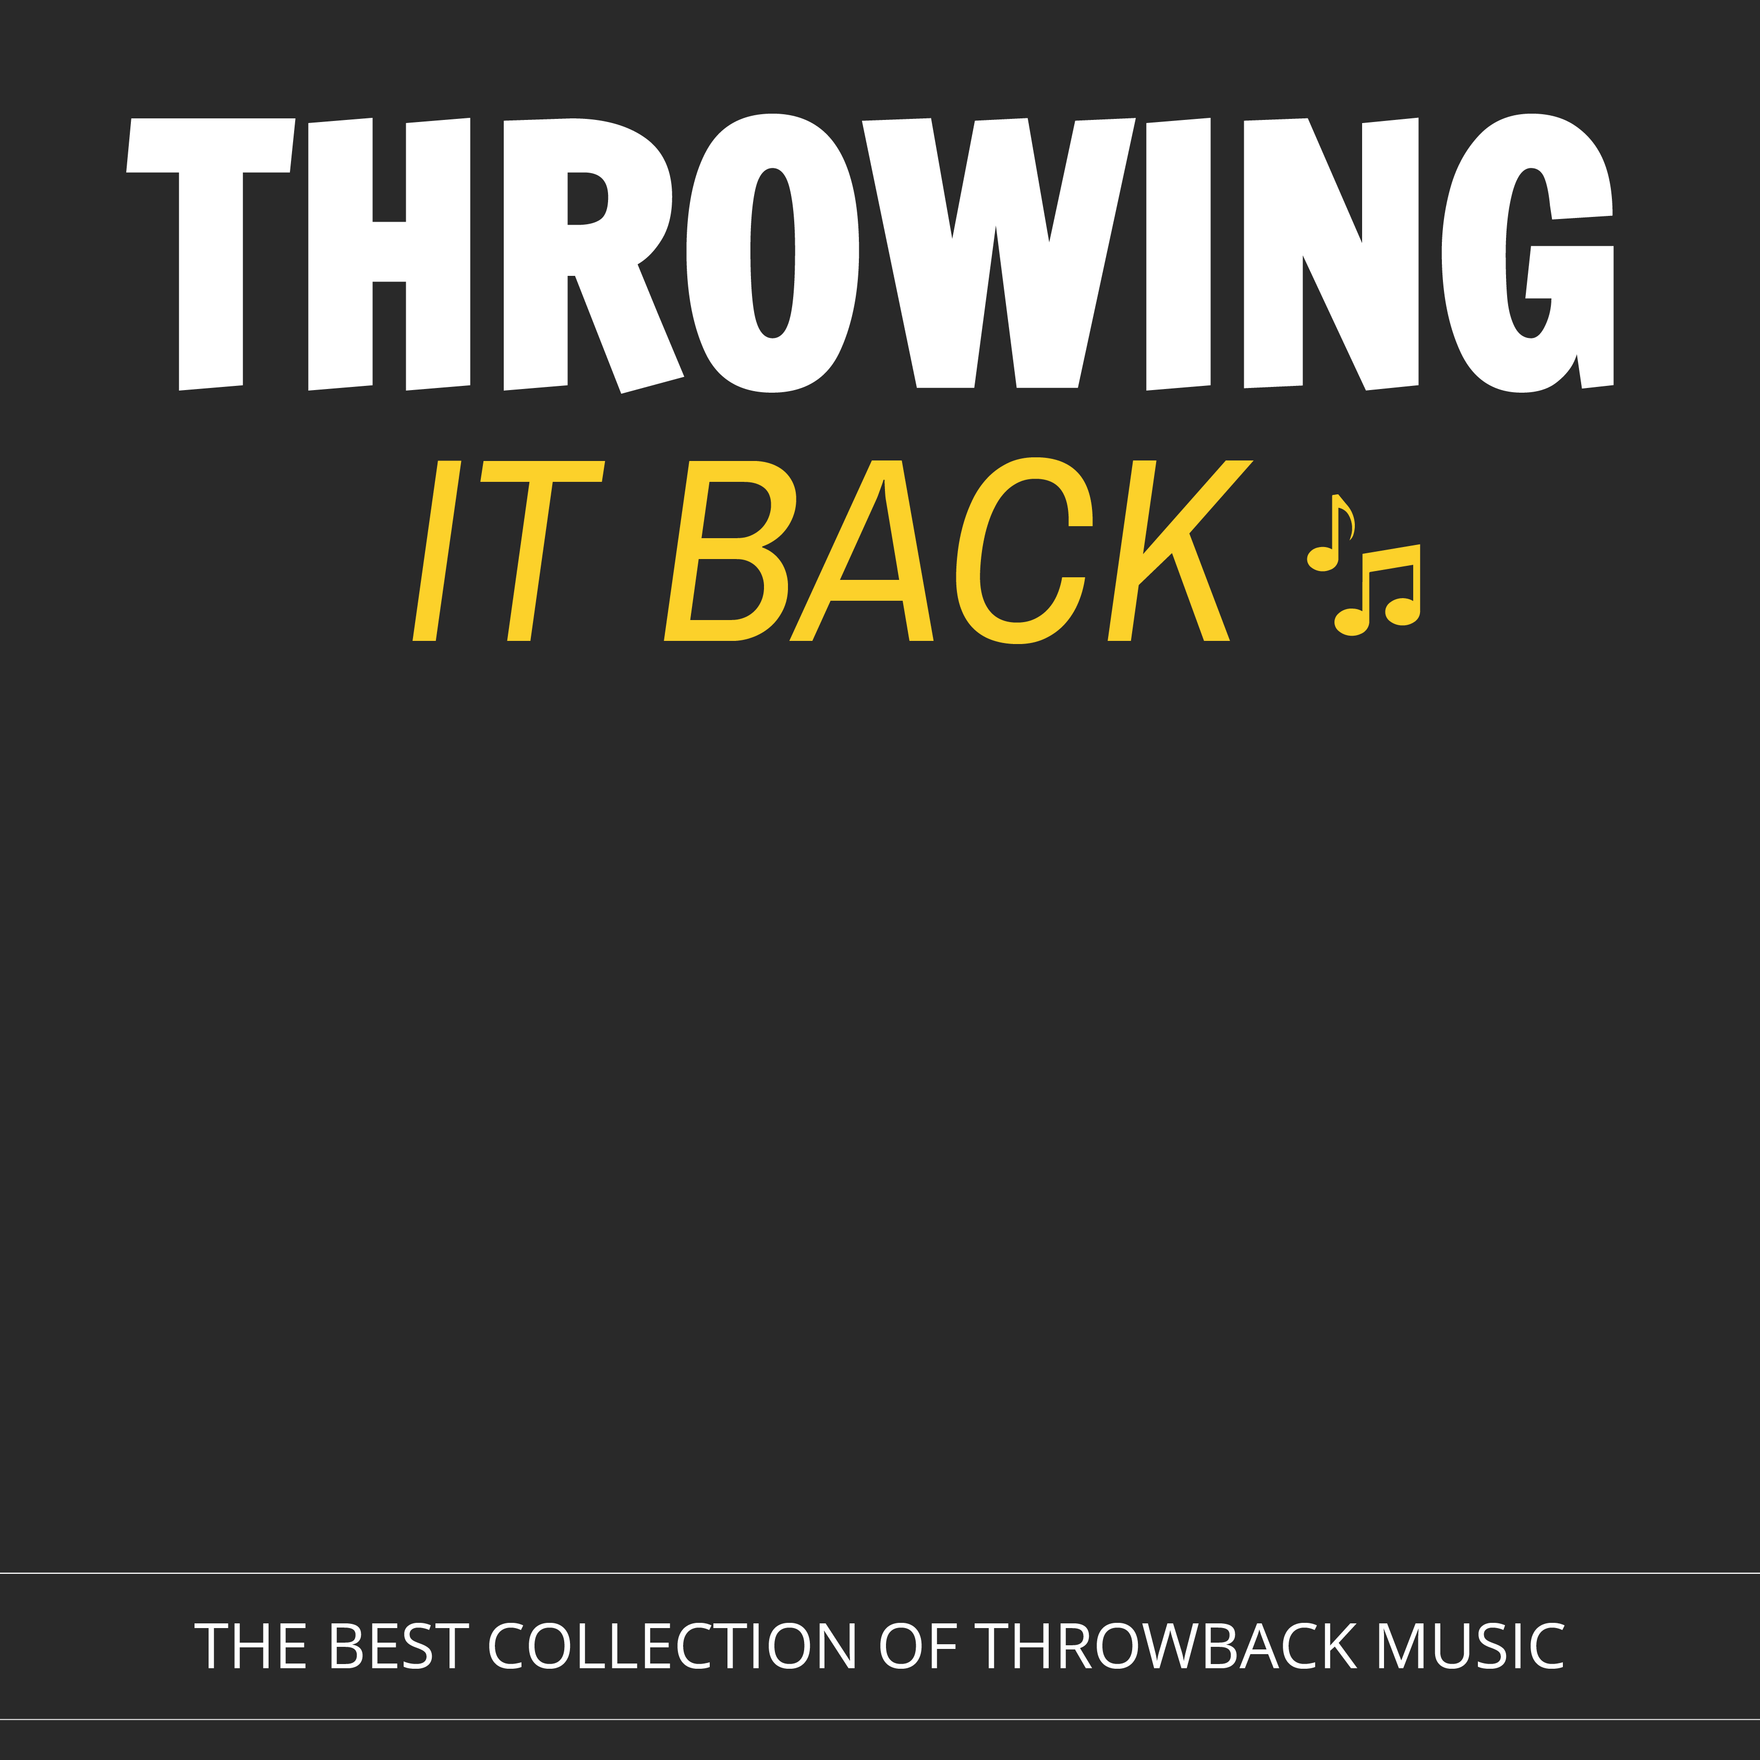 Throwback Playlist Cover in Word, Illustrator, PSD